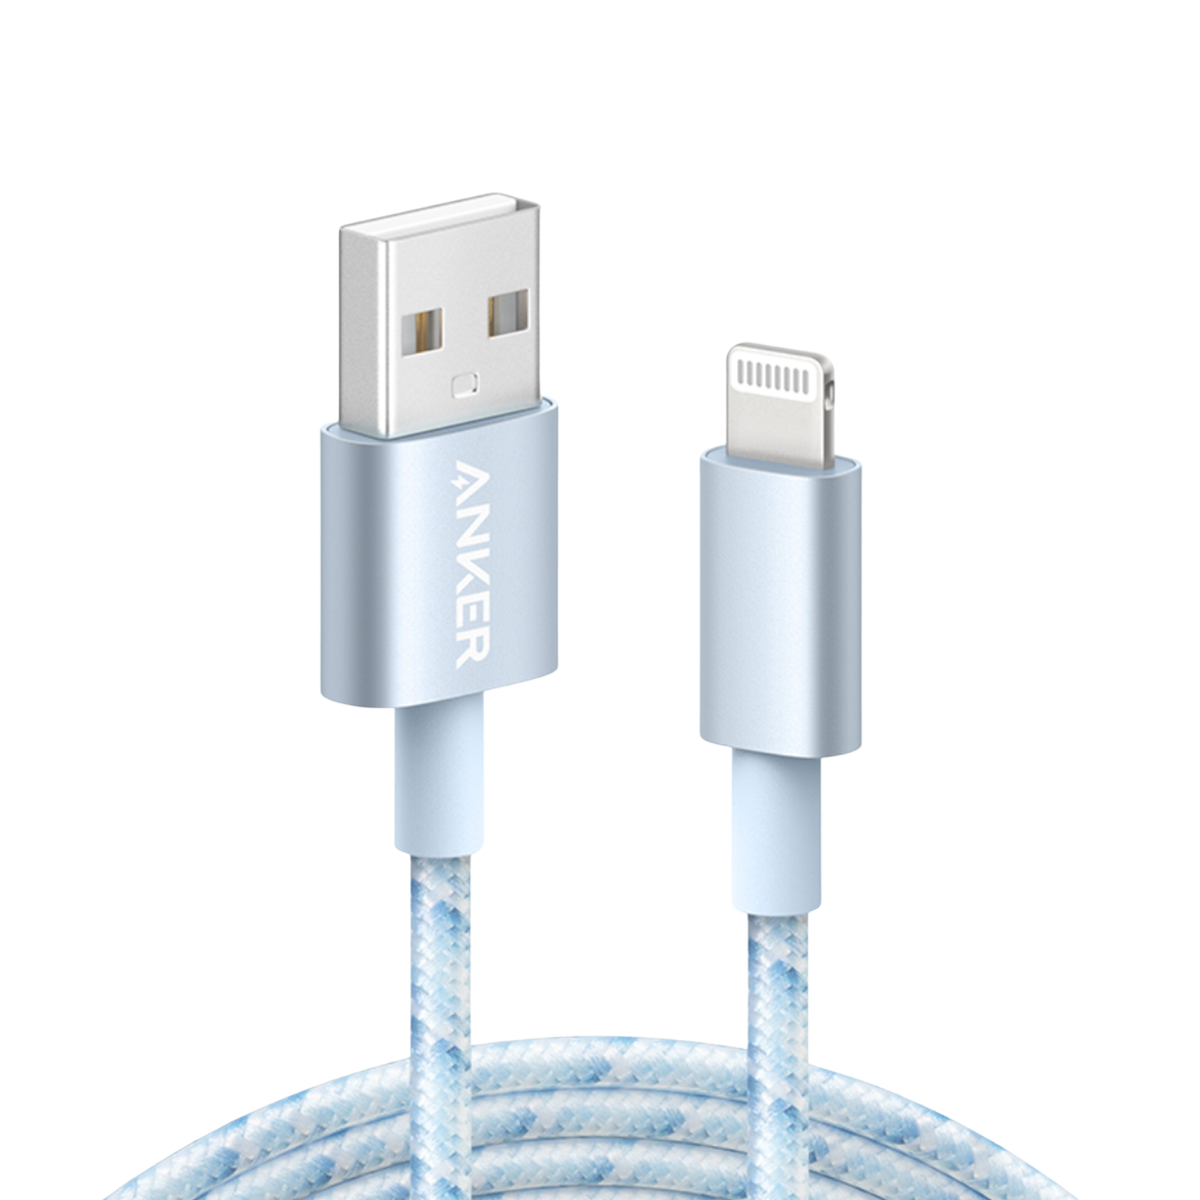 Lightning Cables (For iPhone) - Anker UK